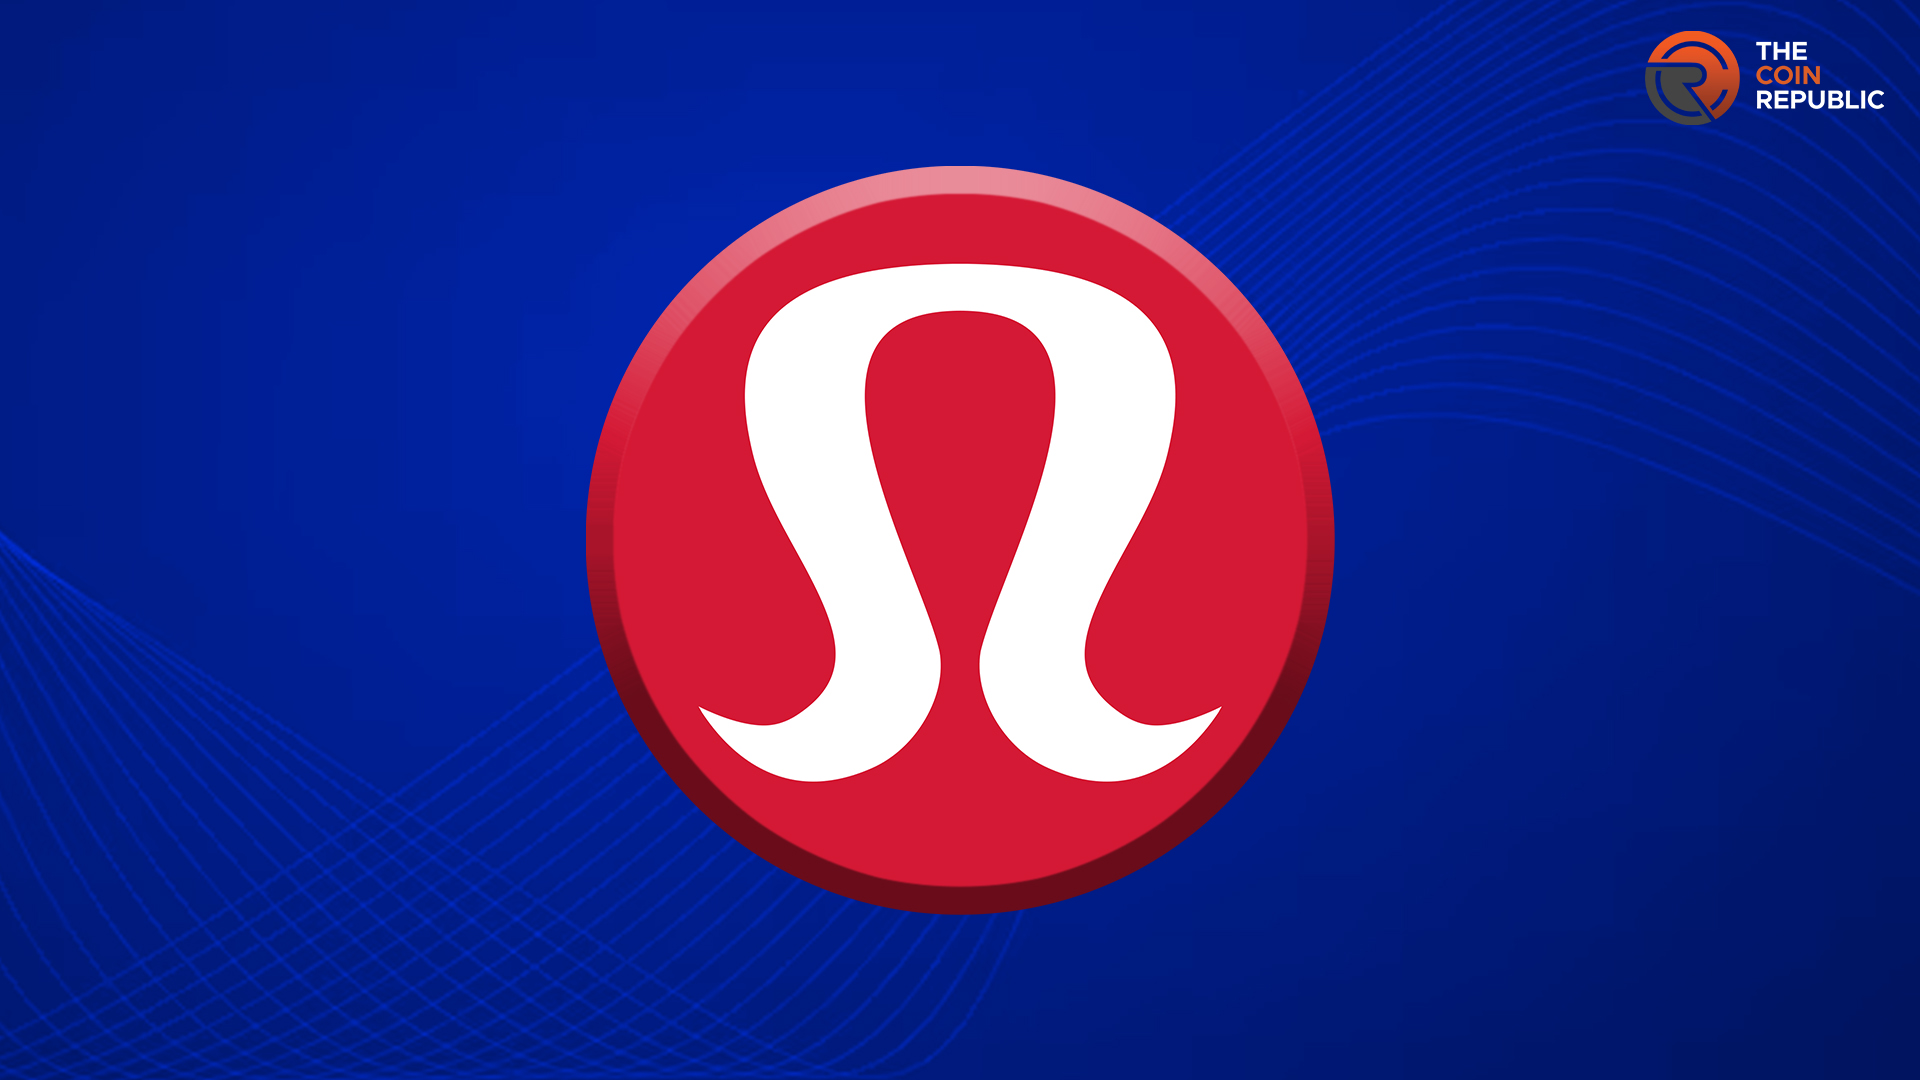 Lululemon Stock: Is LULU Bouncing Back From The Lower Levels?